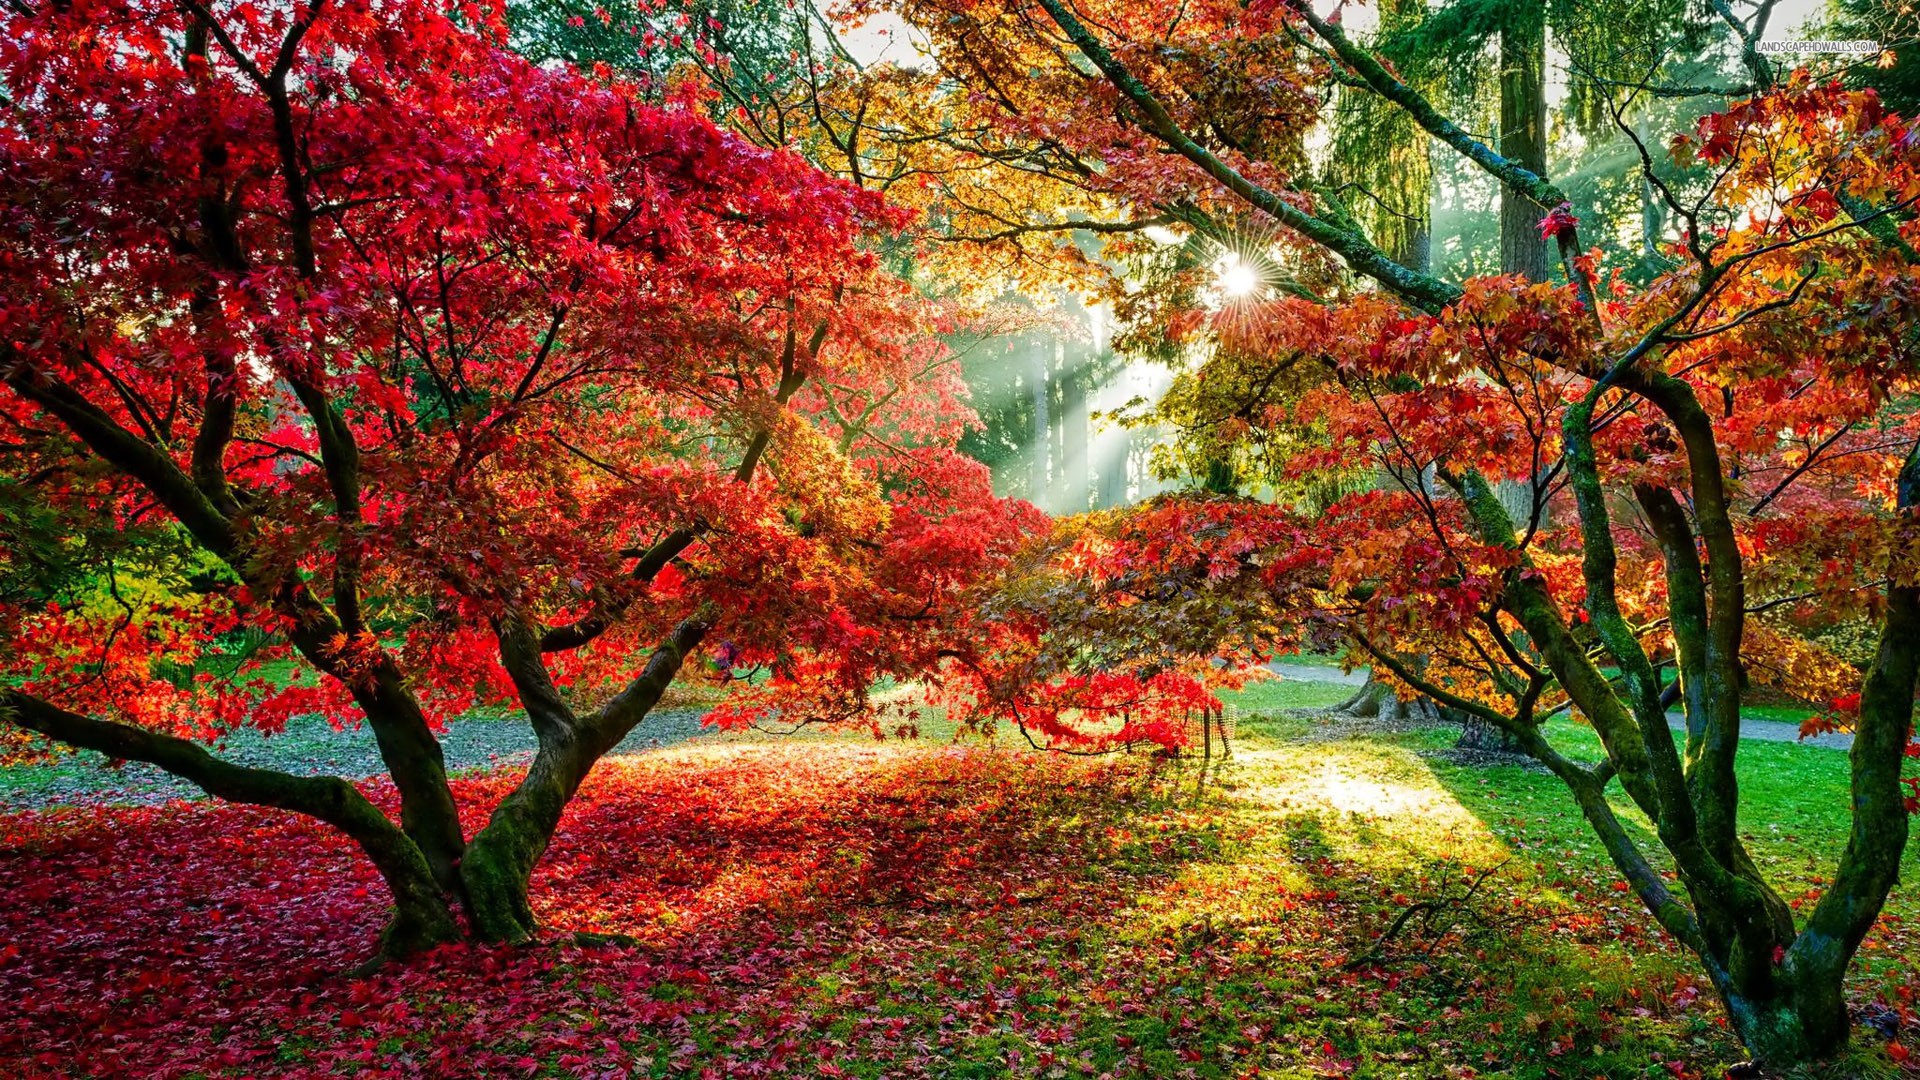 General 1920x1080 trees sun rays fall leaves red leaves path park outdoors fallen leaves